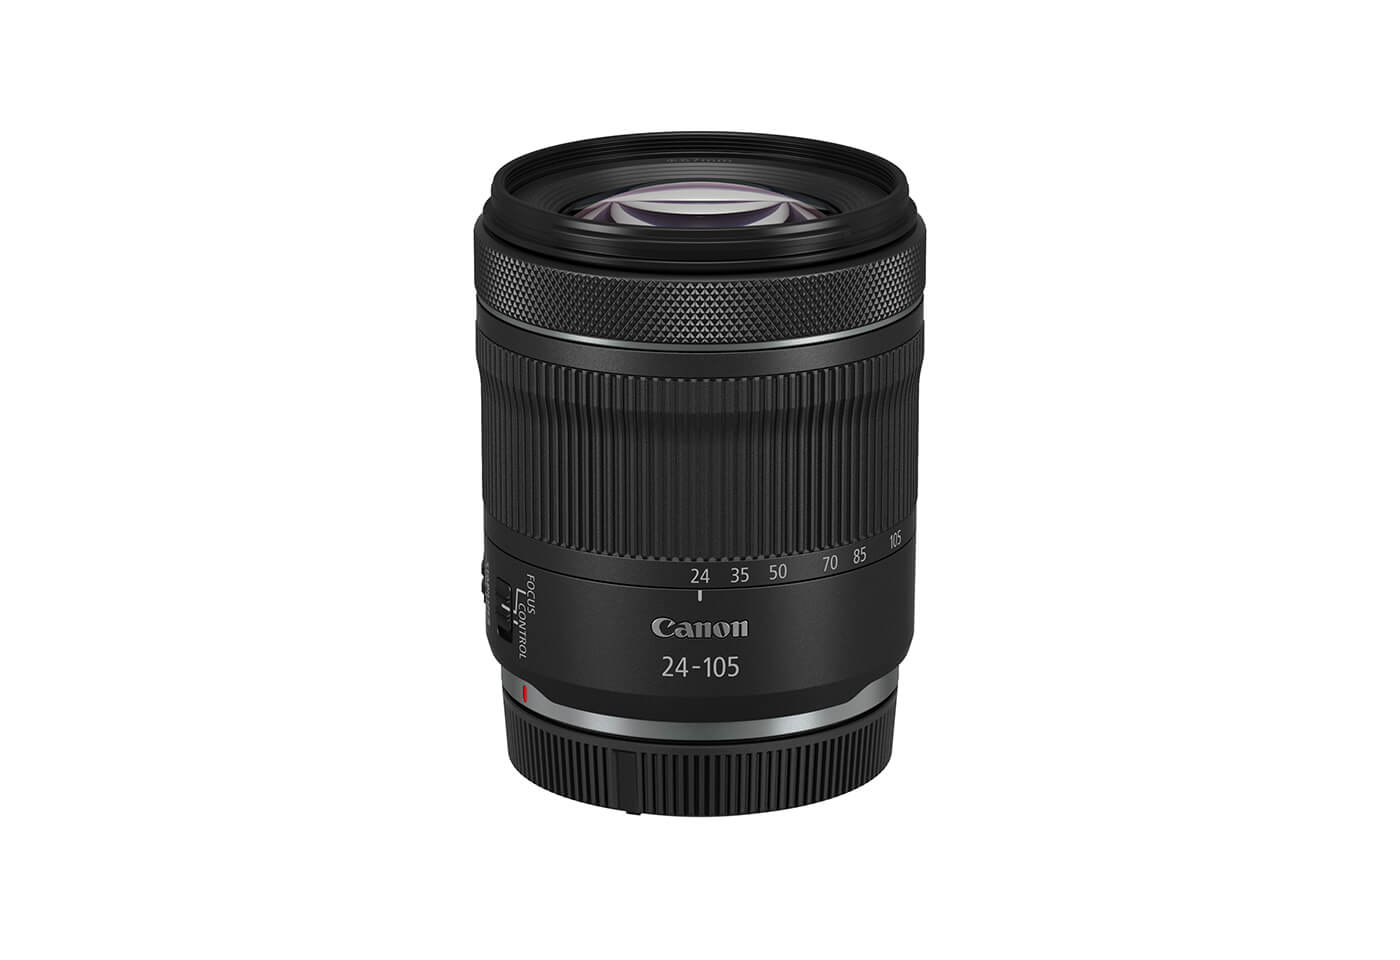 Product image of RF 24-105mm f/4-7.1 IS STM standard zoom lens